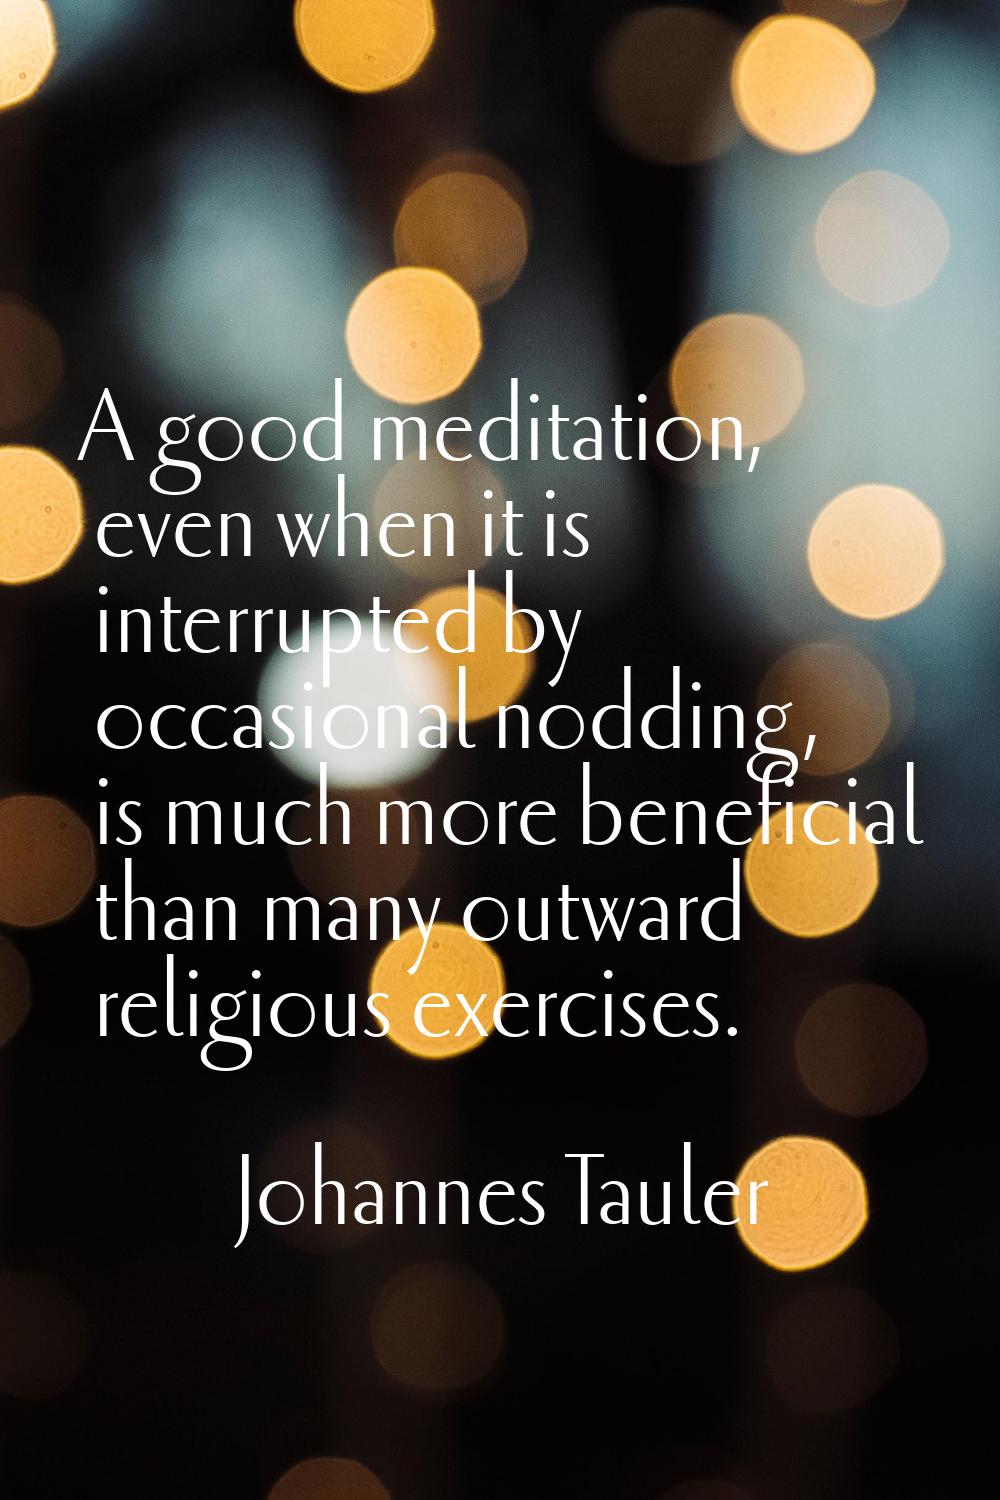 A good meditation, even when it is interrupted by occasional nodding, is much more beneficial than 